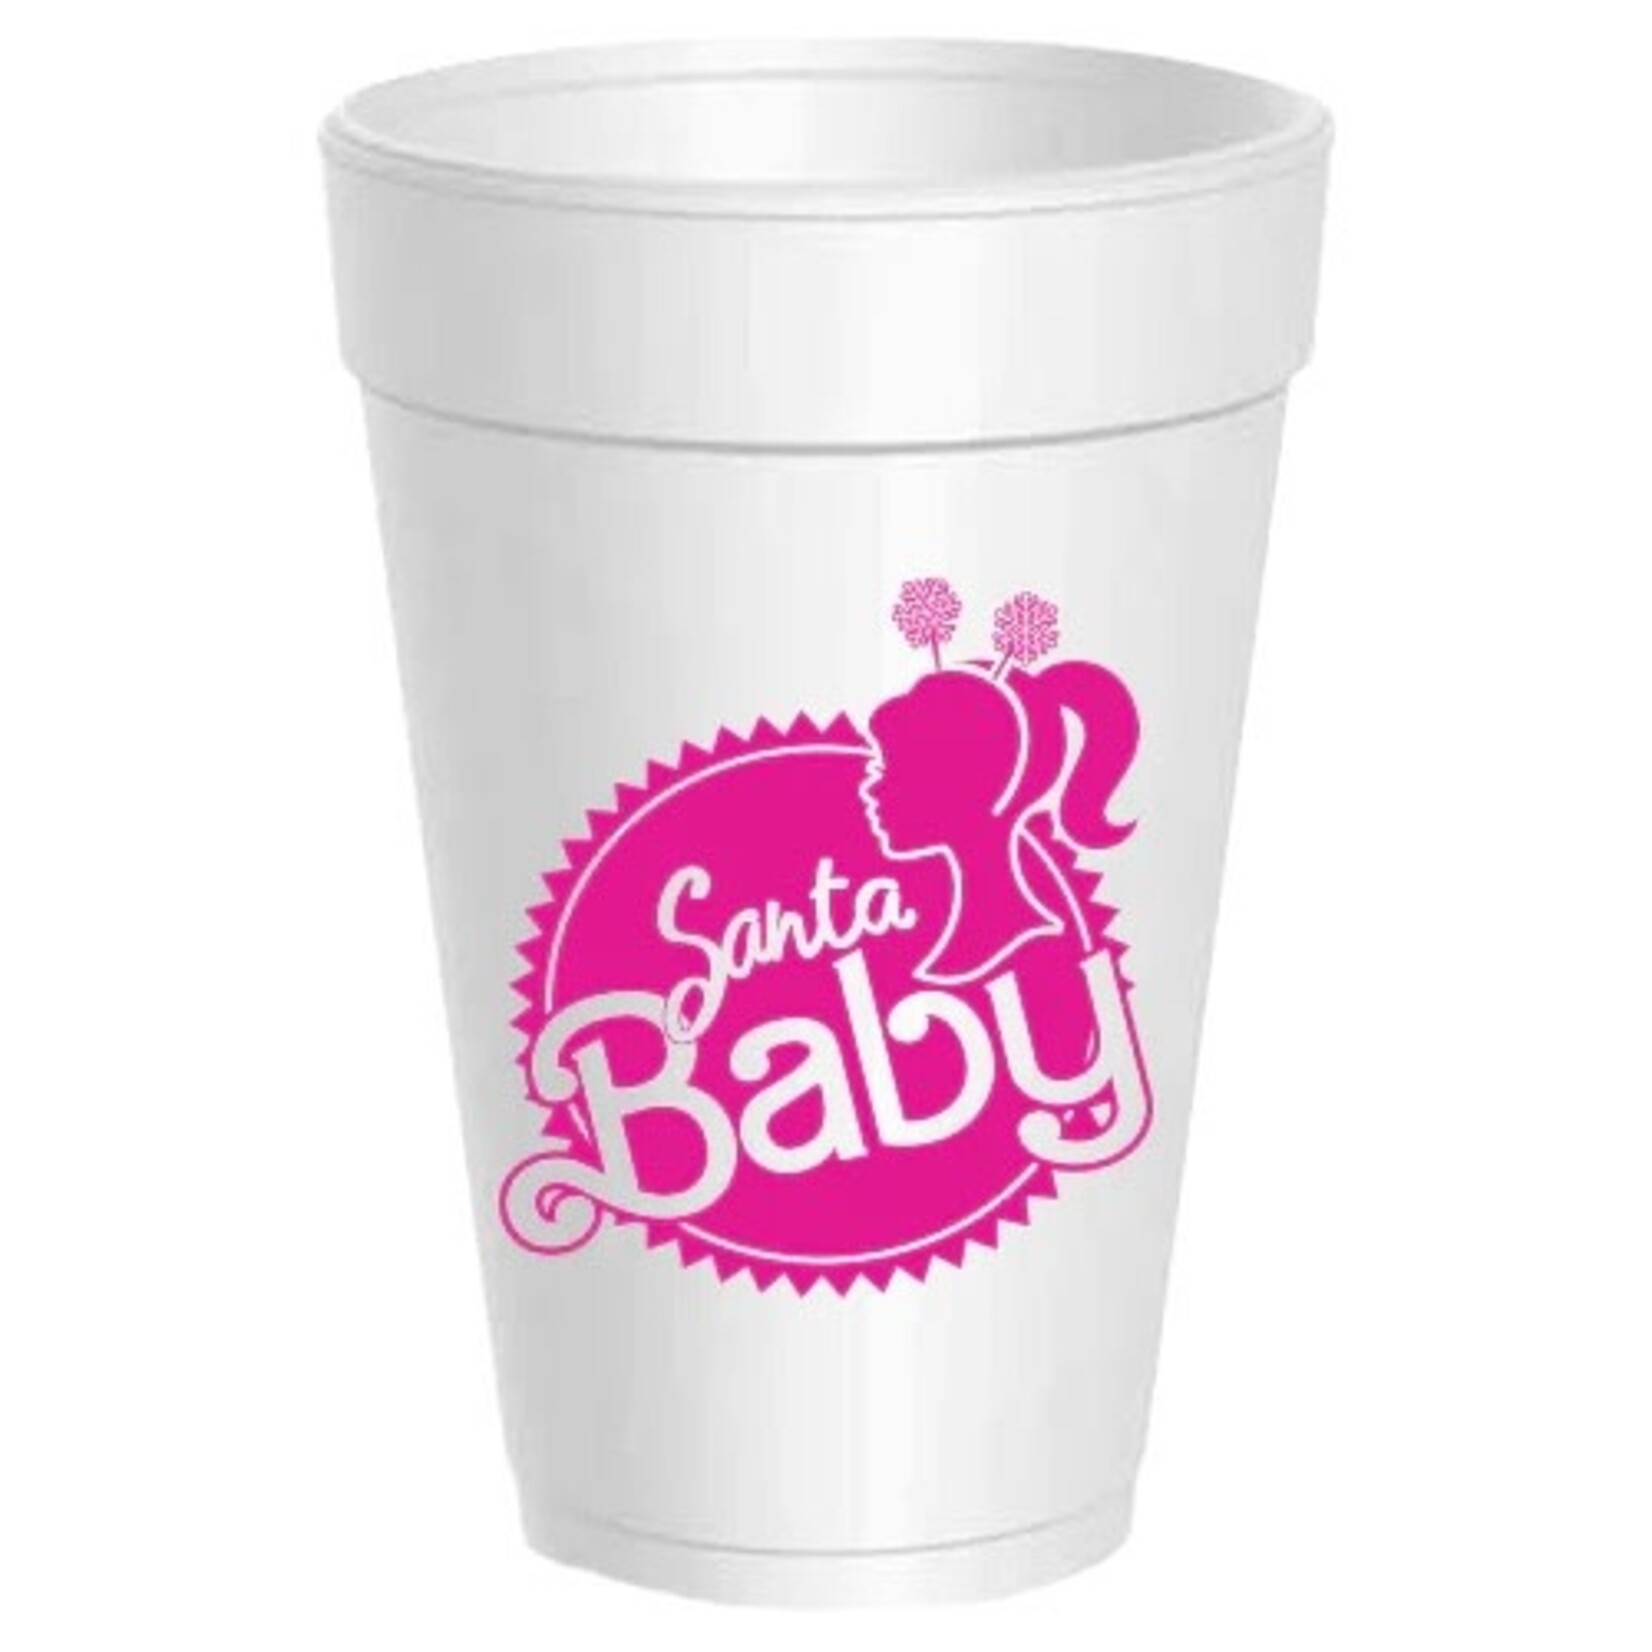 Santa Baby - Hot Pink- Pack of 10 Cups